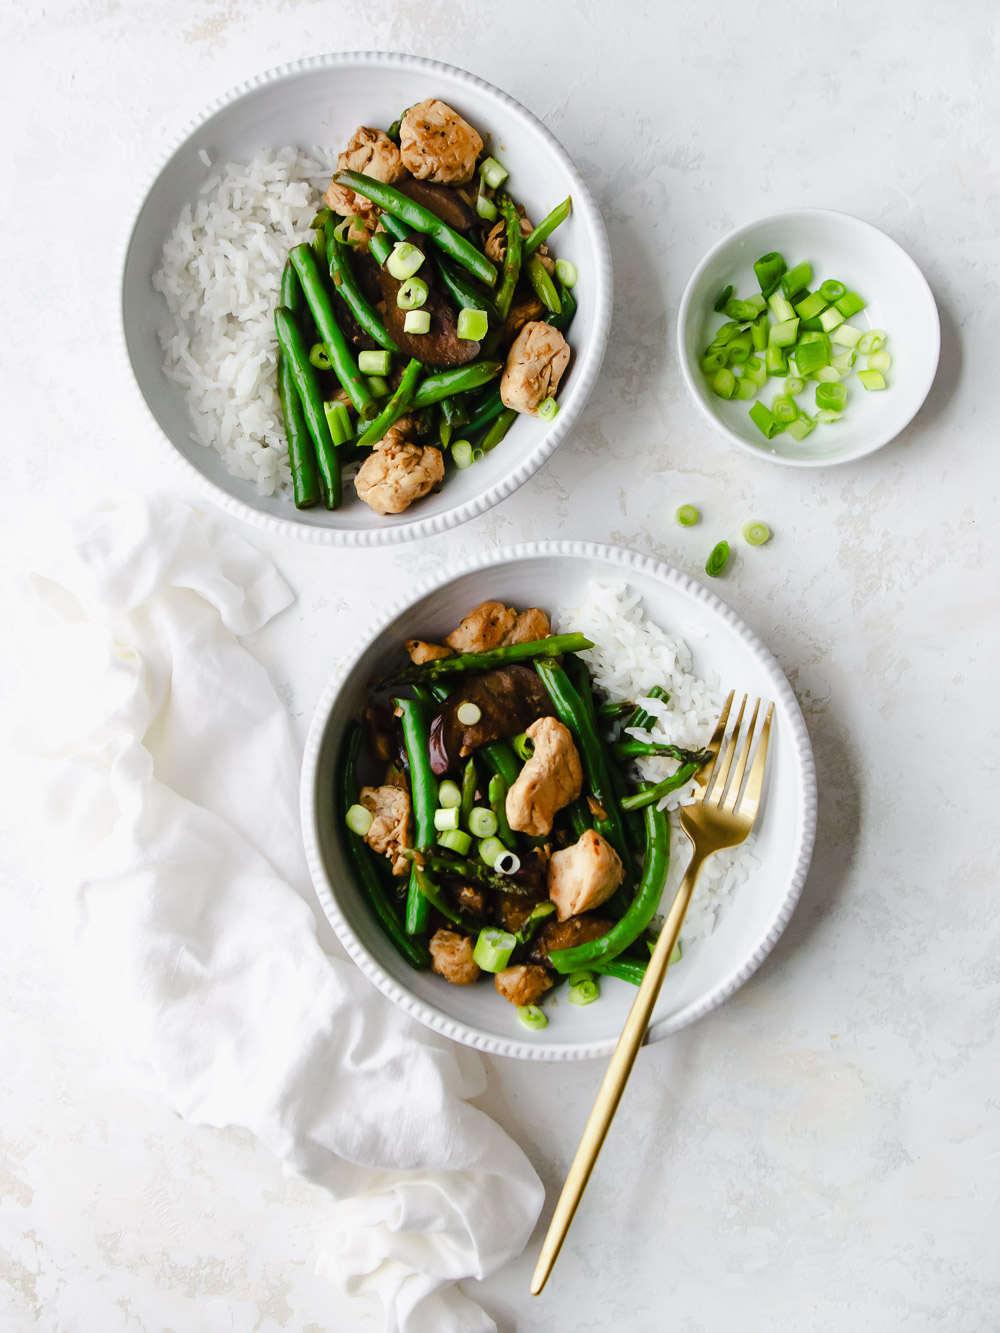 Two white bowls of healthy chicken stir fry made with green beans, egg plant and asparagus mixed with a garlic ginger (no soy) stir fry sauce, plated with white rice and garnished with green onions.